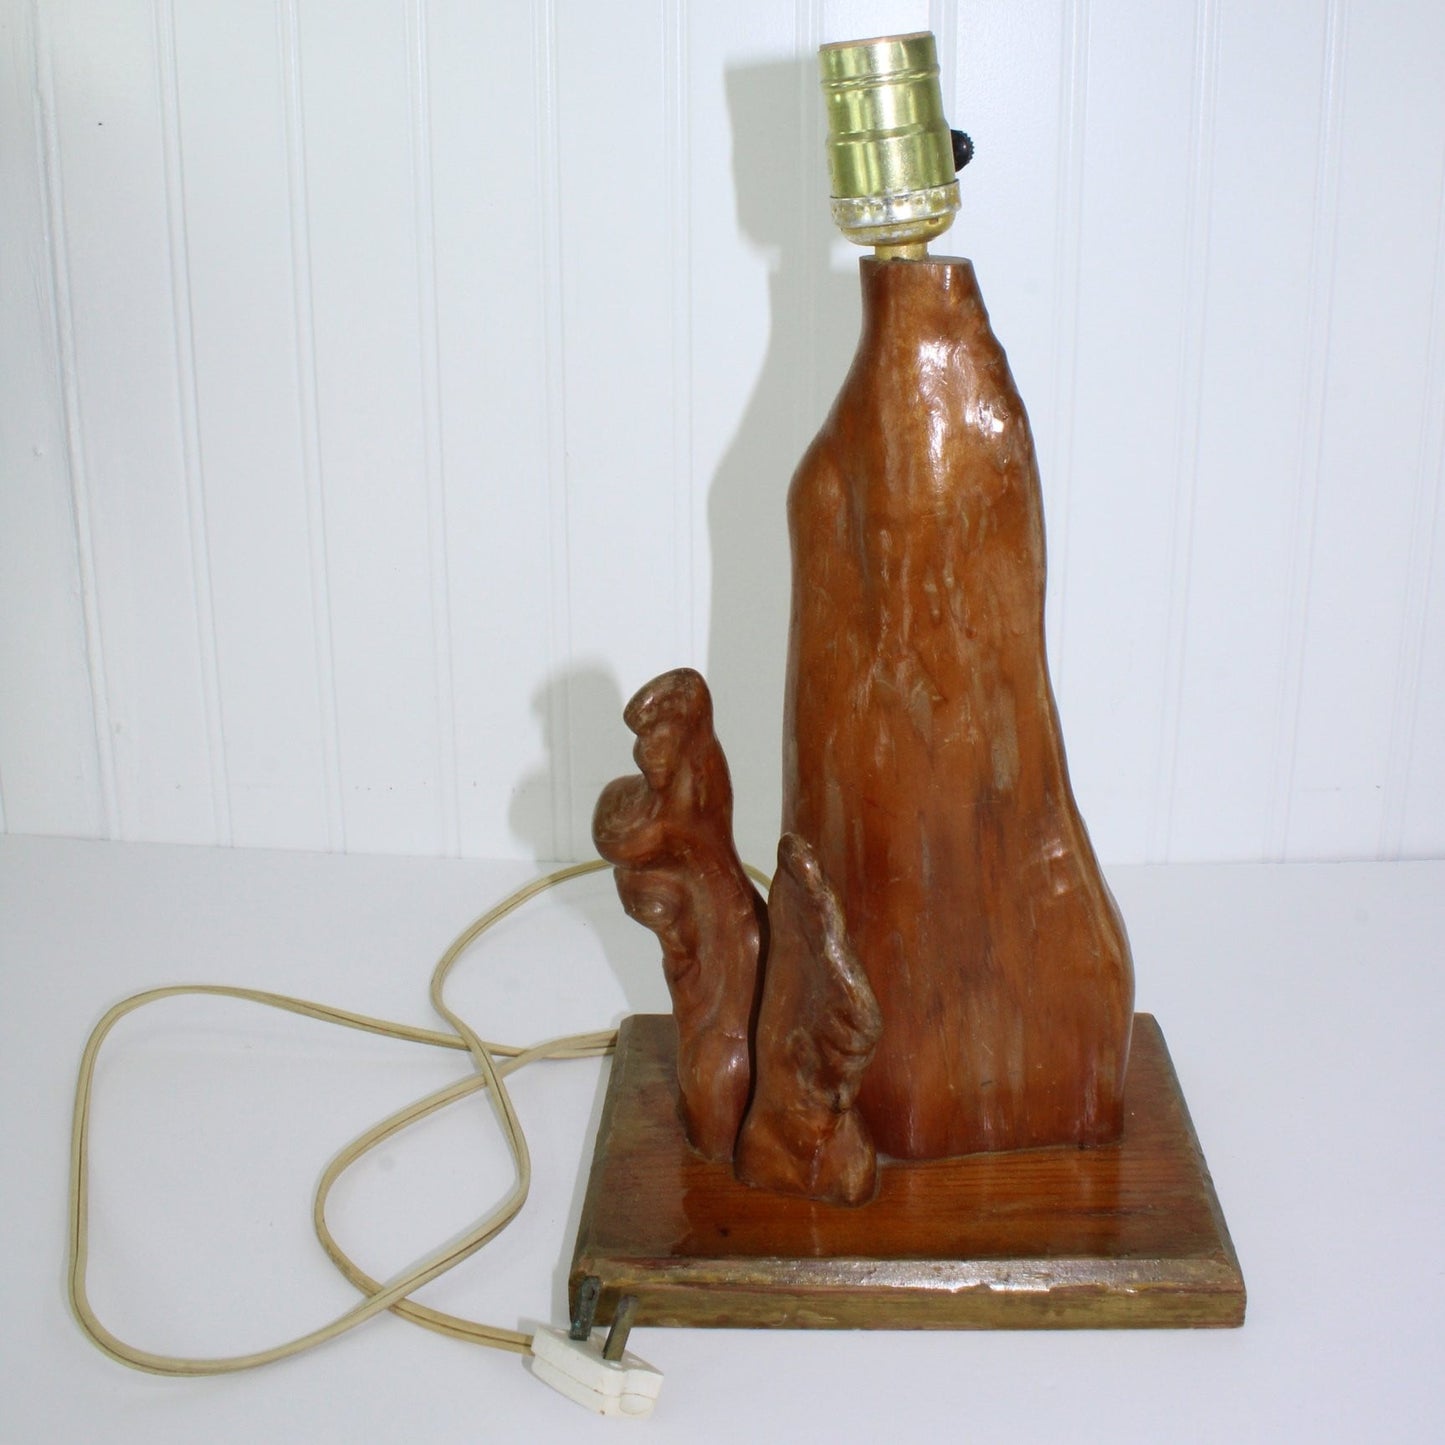 Old Cypress Knee Lamp Hand Made - Rustic Florida Style Vintage